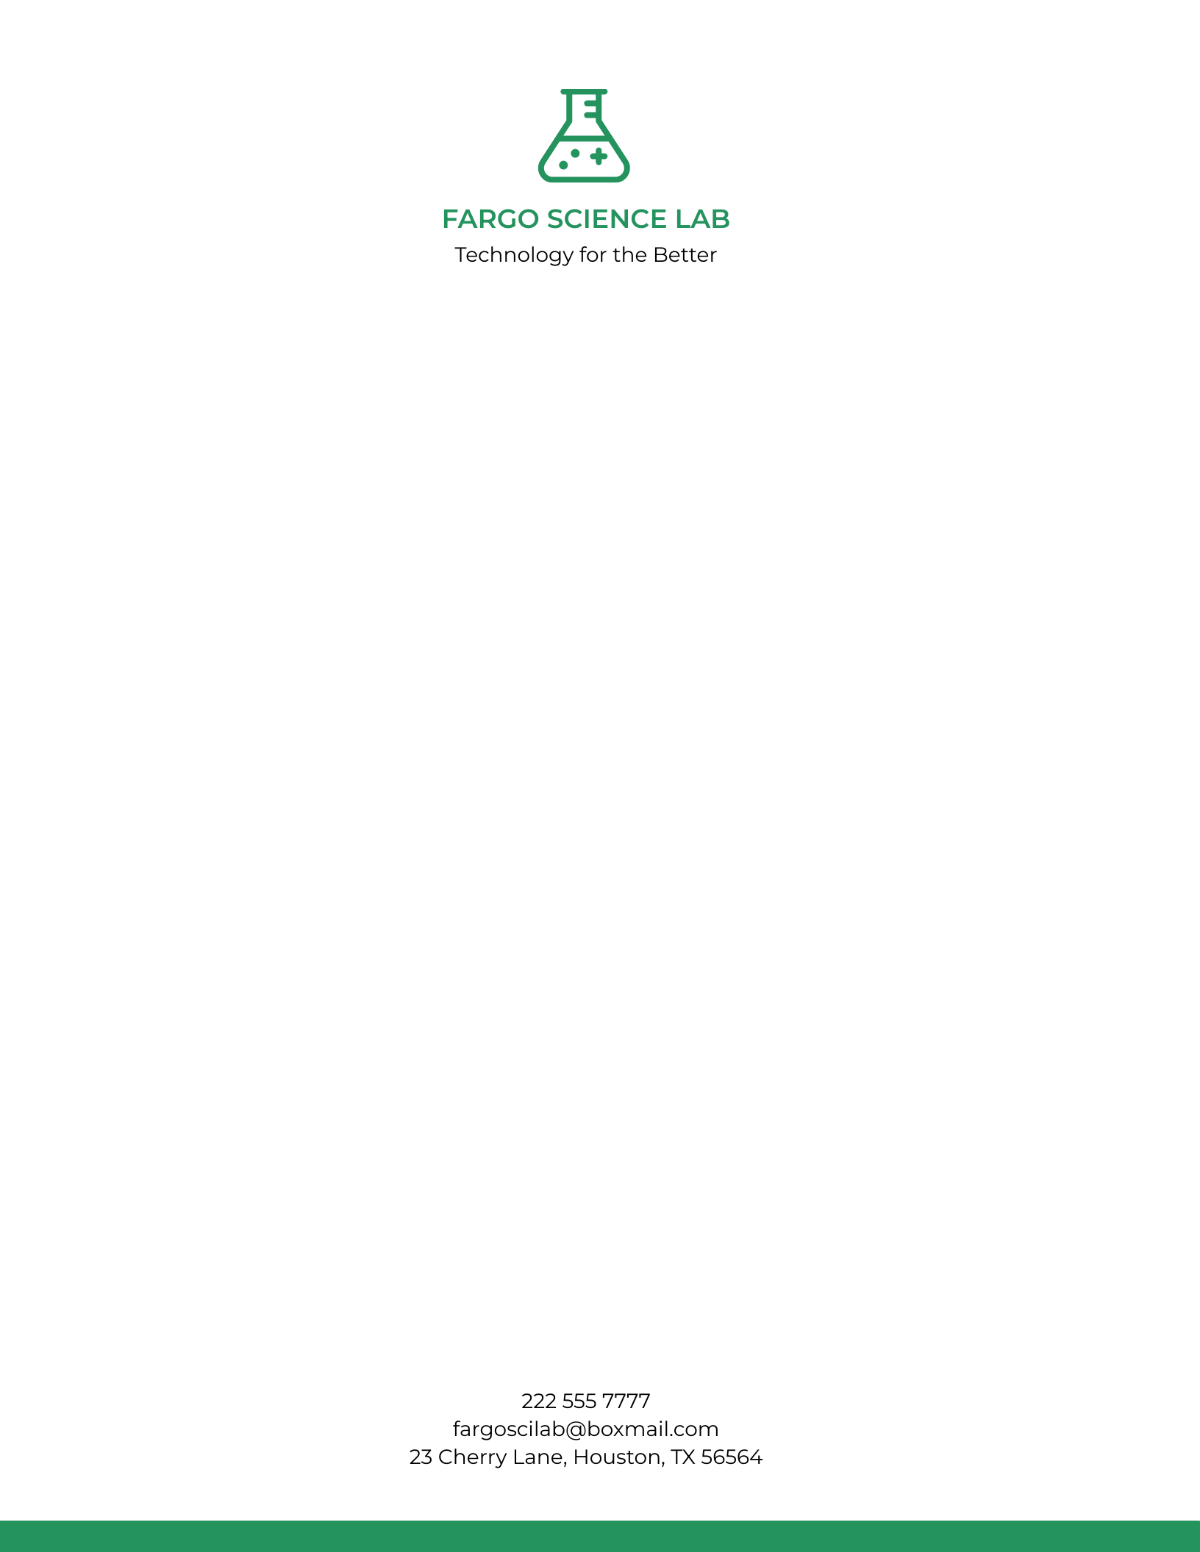 Free Science Official Letterhead Template